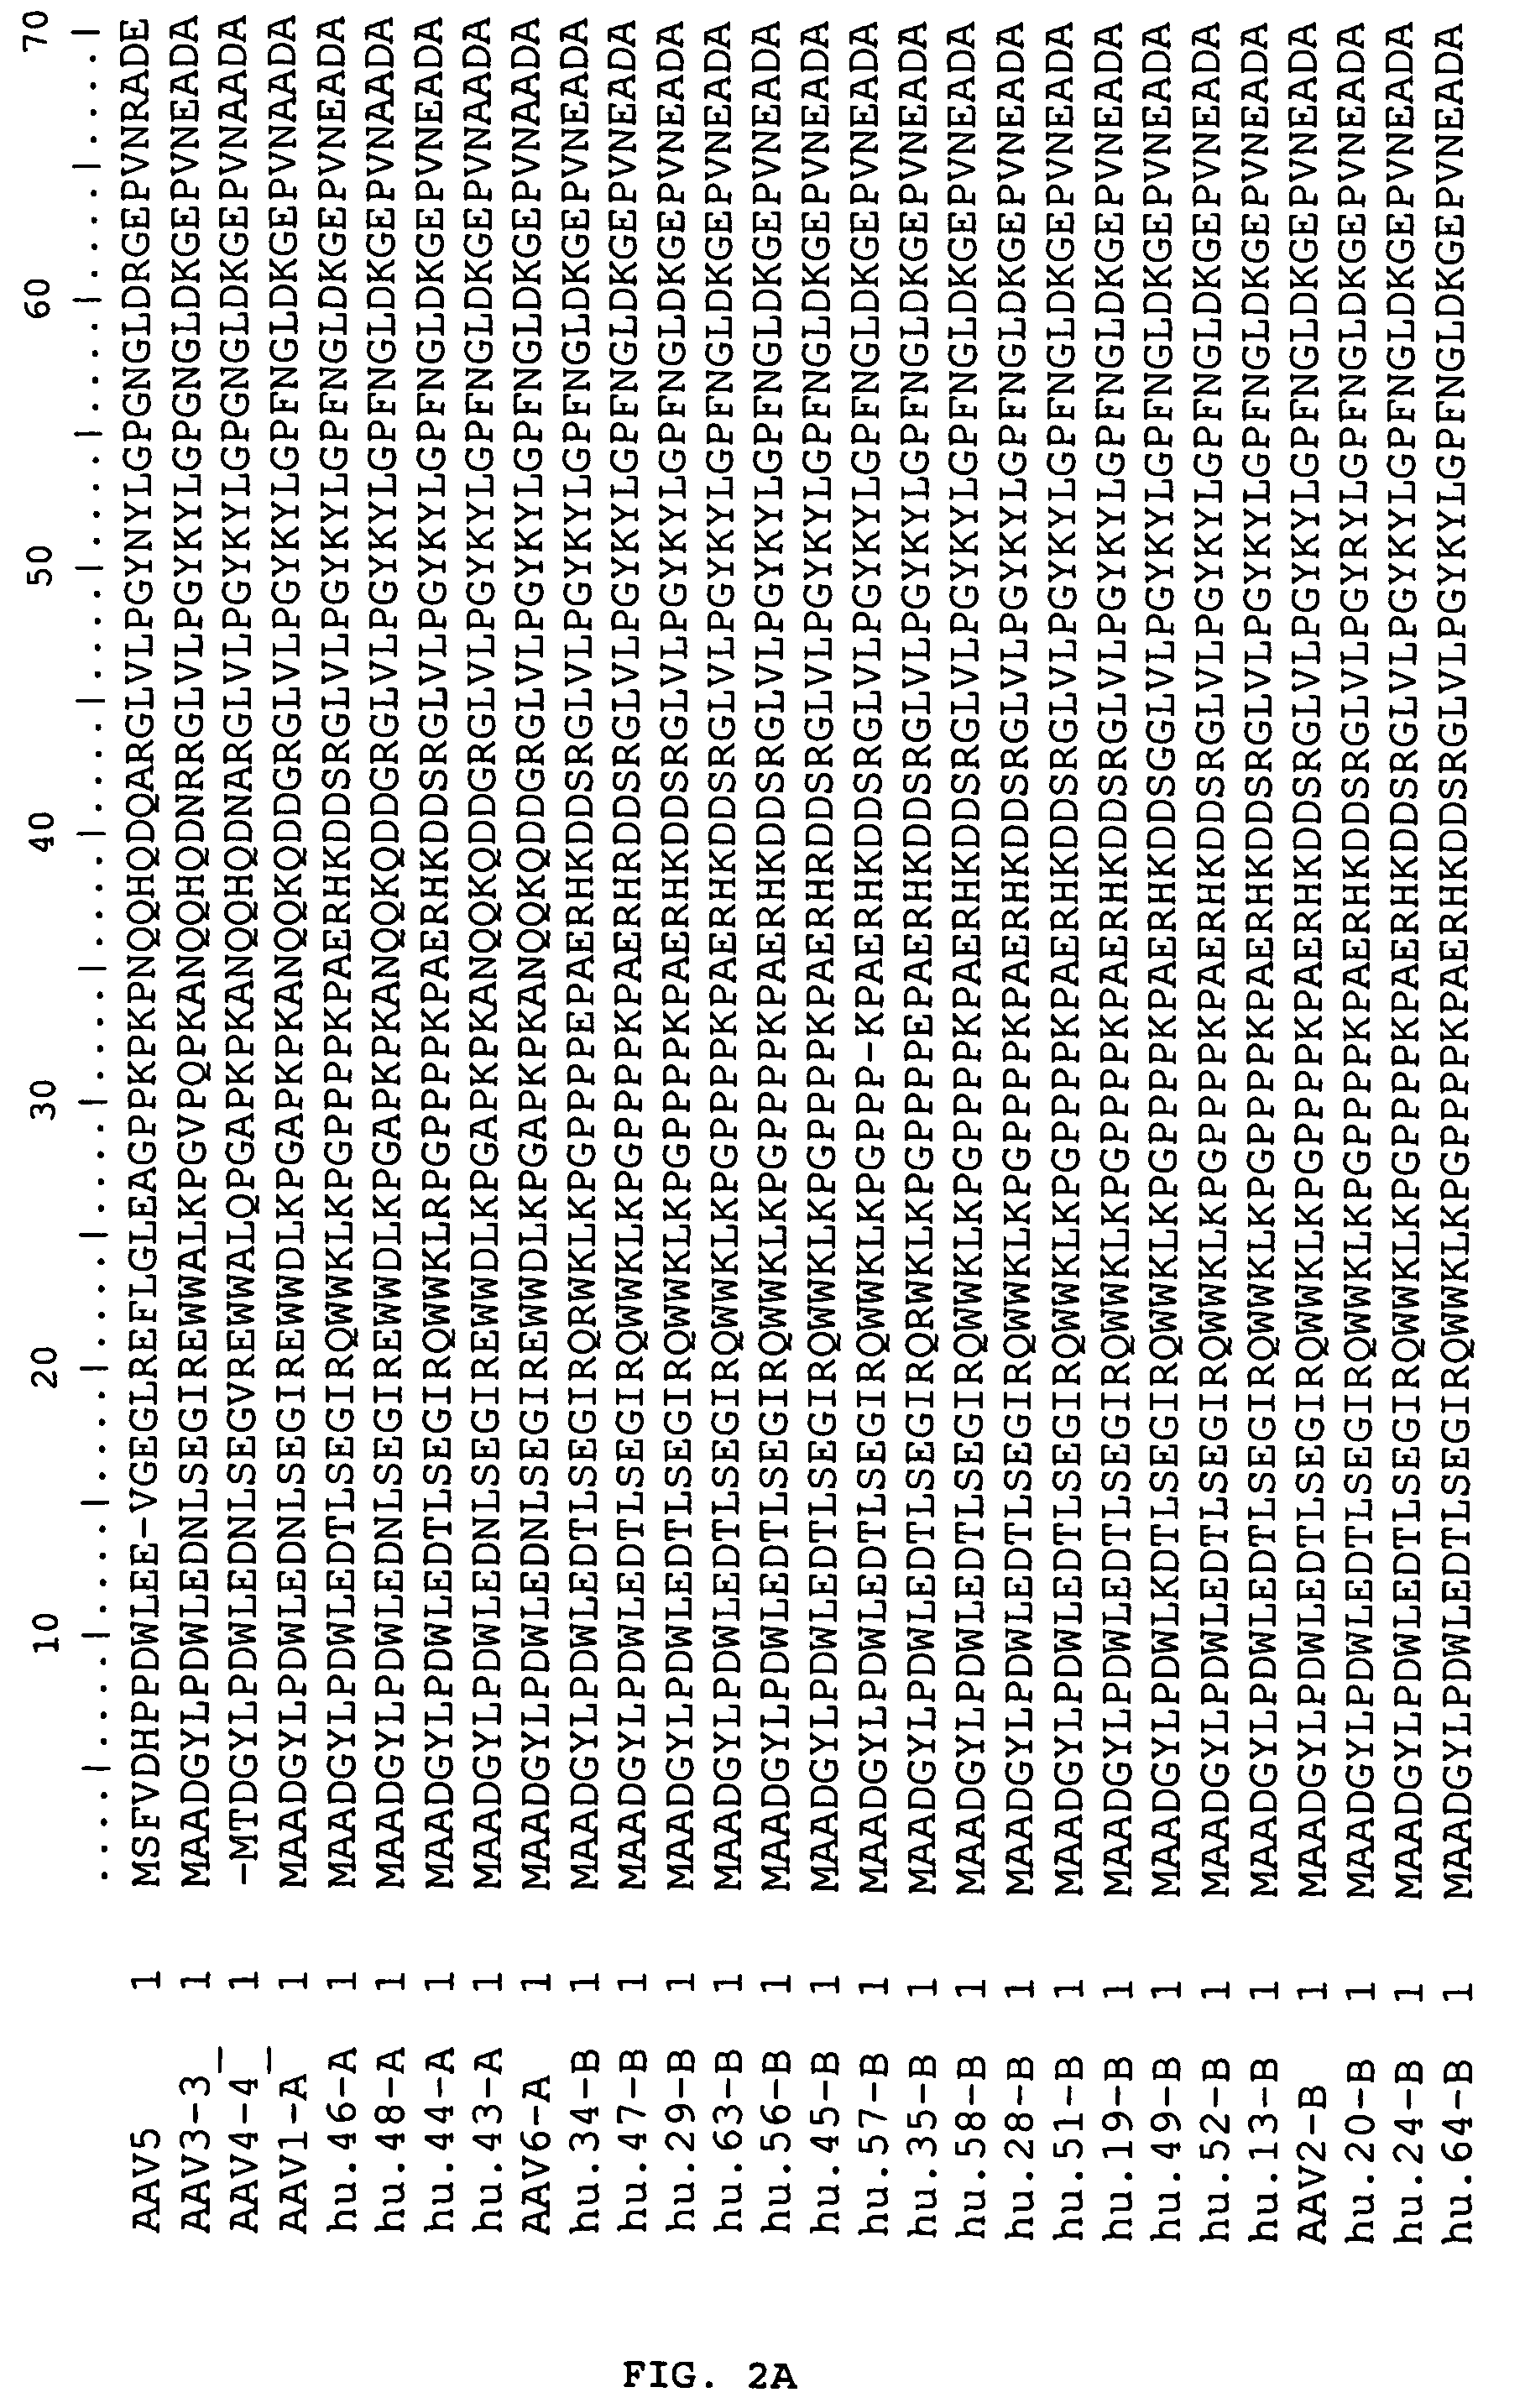 Adeno-associated virus (AAV) clades, sequences, vectors containing same, and uses therefor